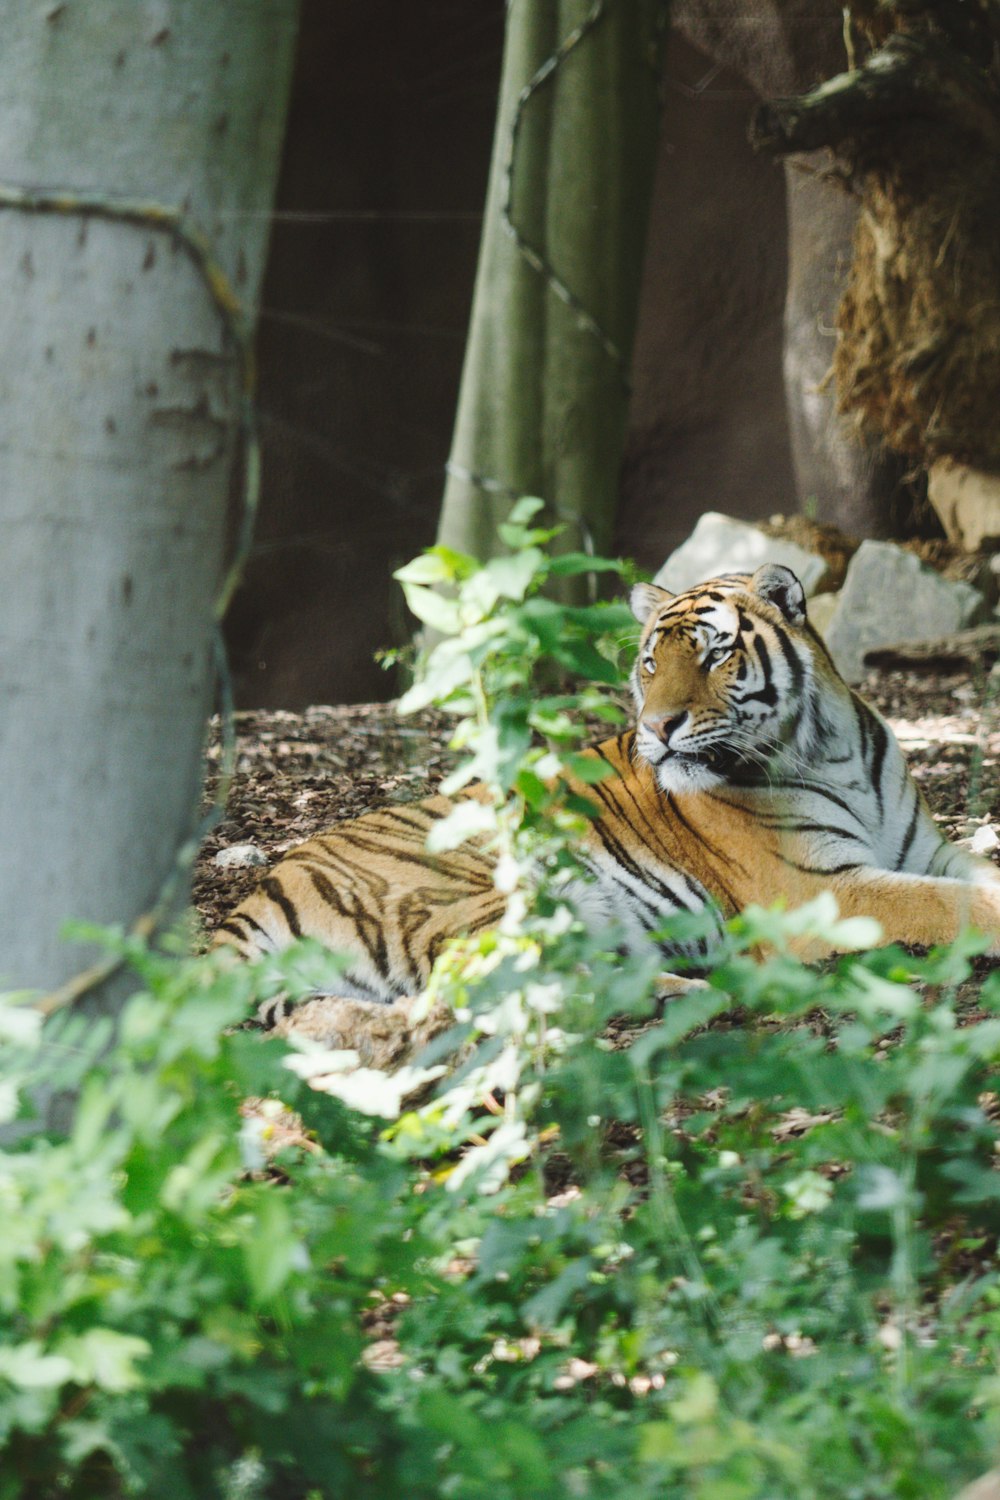 tiger lying on ground beside green plants during daytime